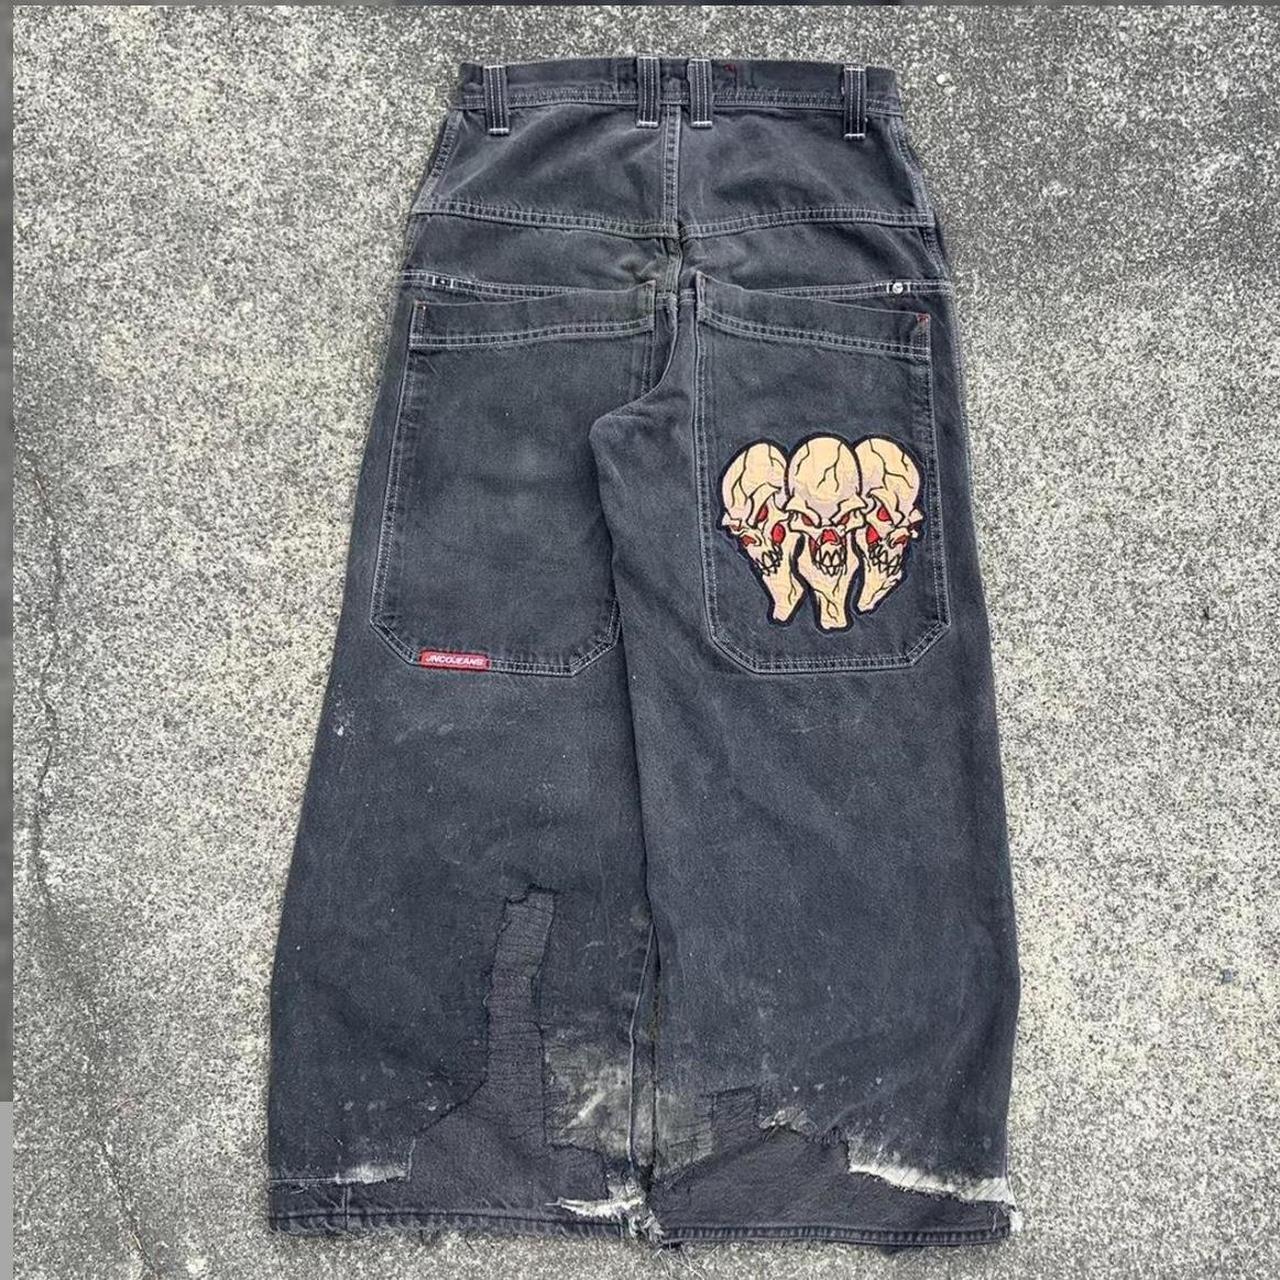 ISO trip skulls AND yin yang jncos, willing to pay... - Depop